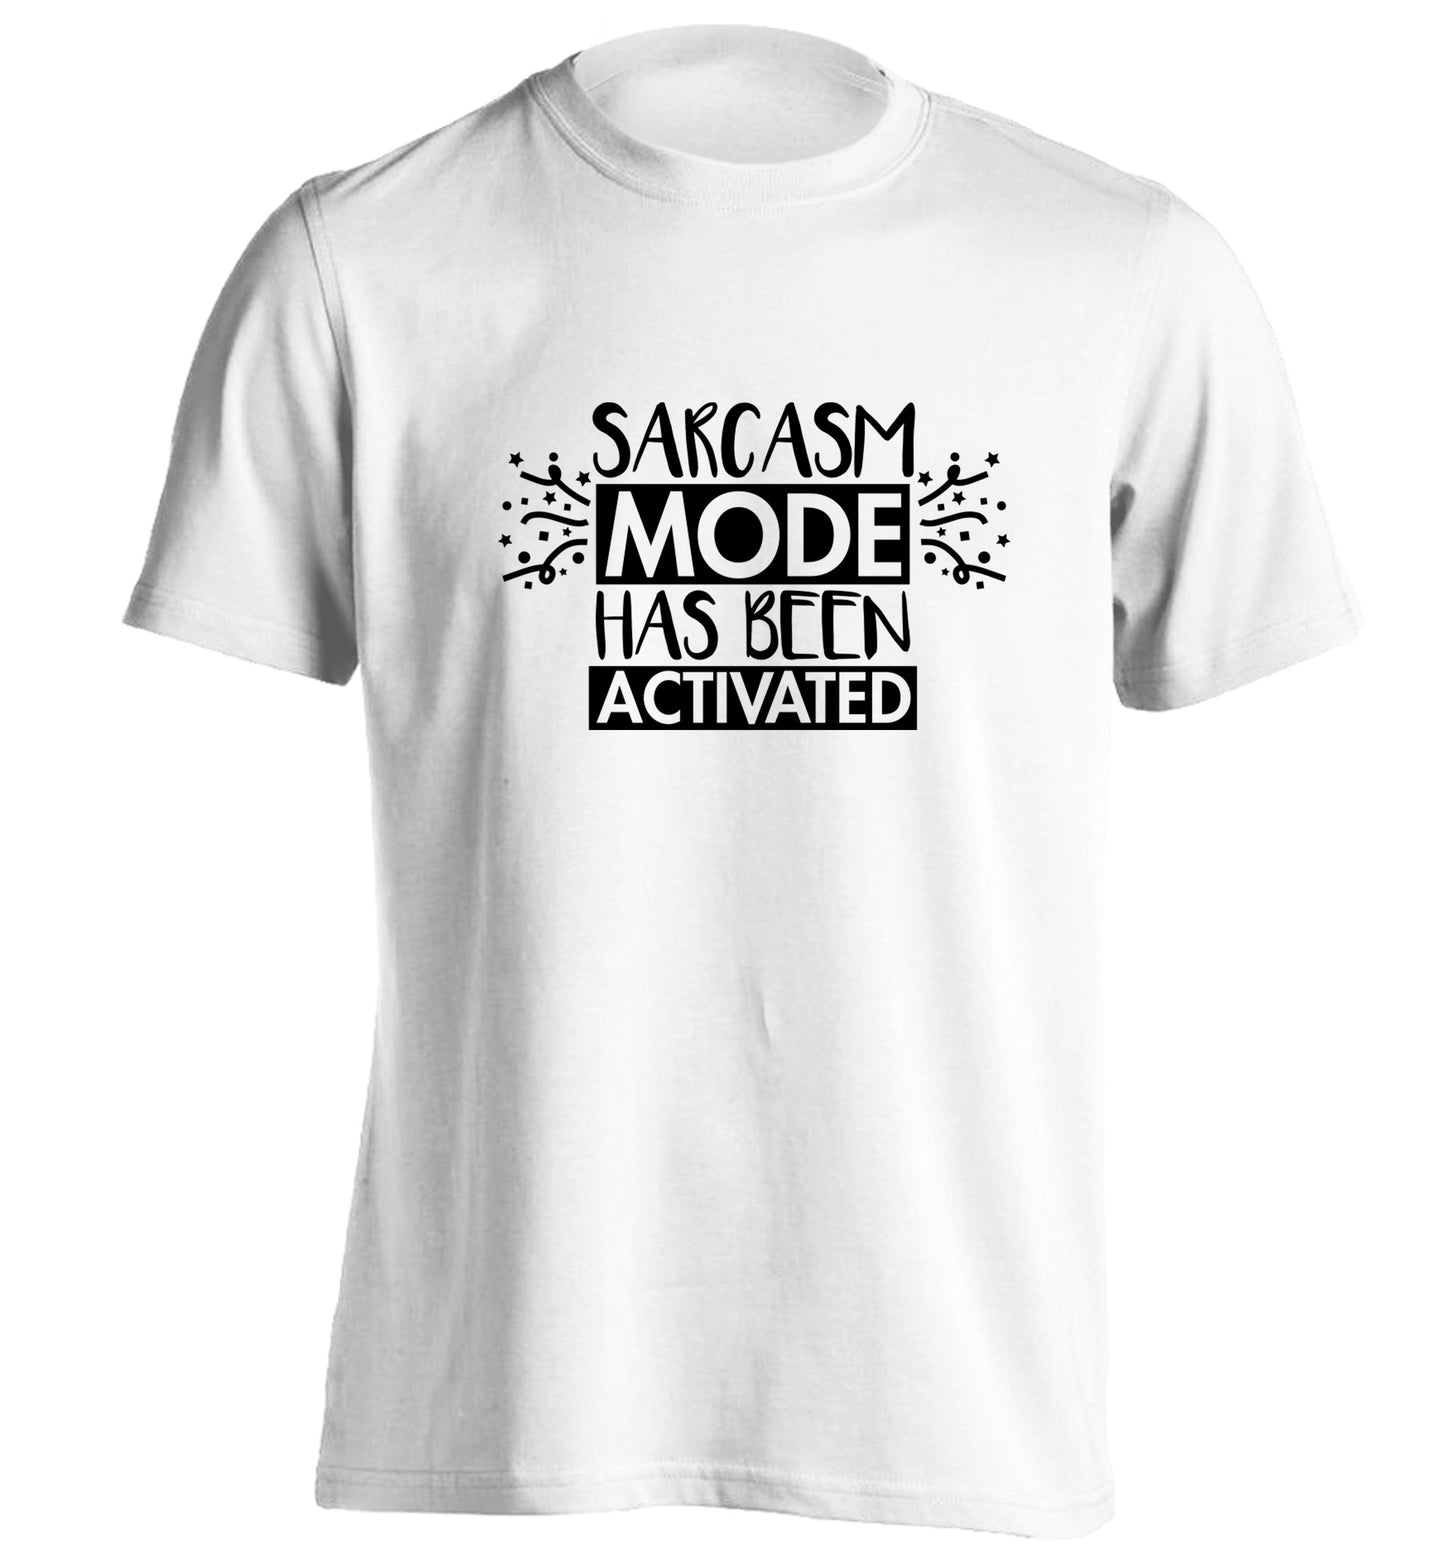 Sarcarsm mode has been activated adults unisex white Tshirt 2XL